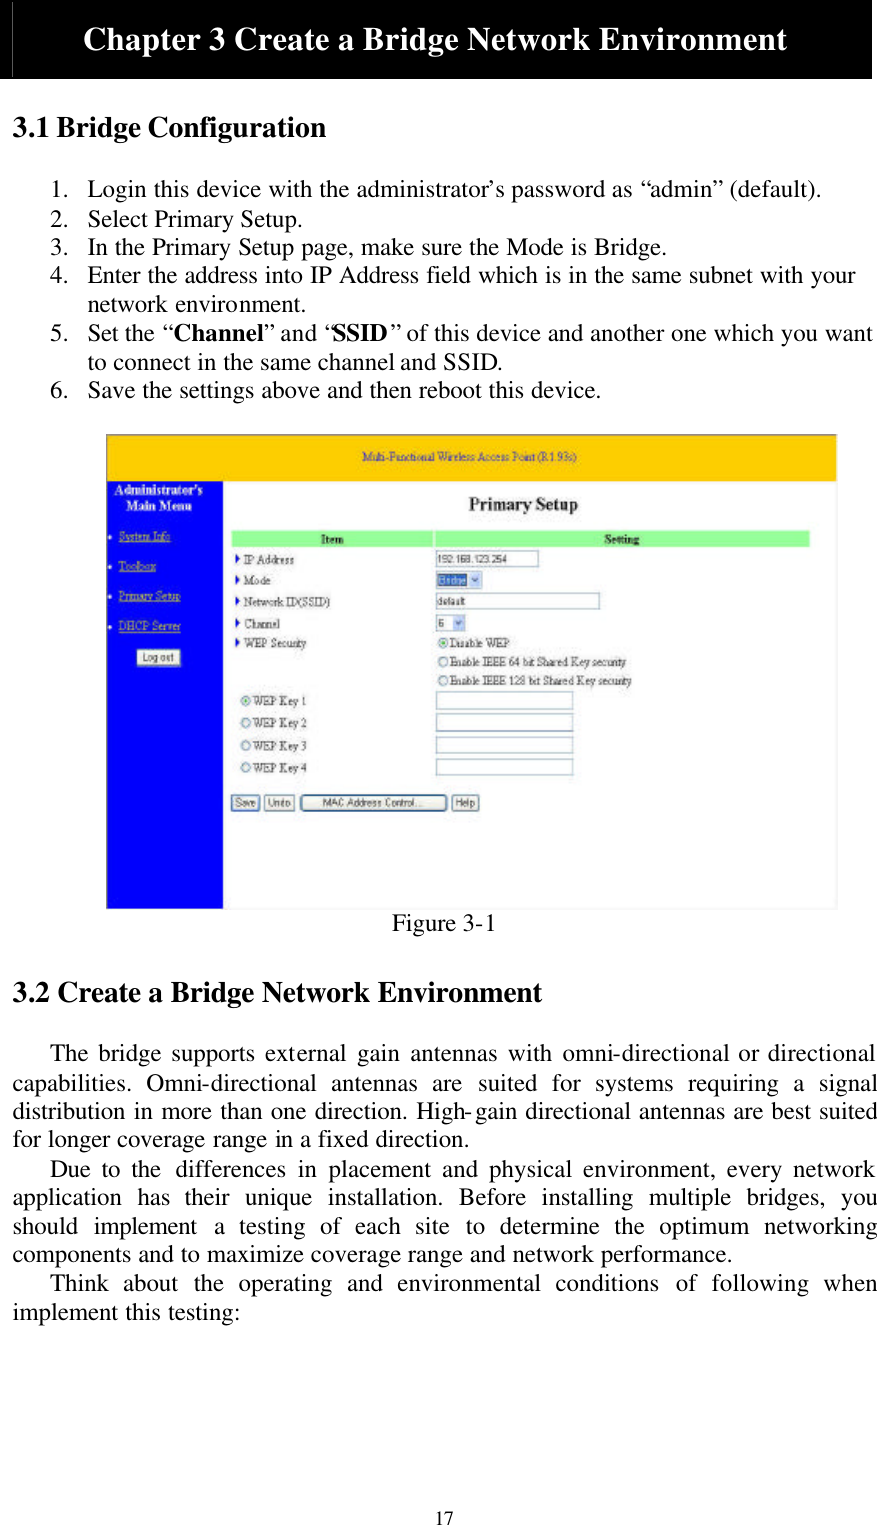  17 Chapter 3 Create a Bridge Network Environment  3.1 Bridge Configuration  1. Login this device with the administrator’s password as “admin” (default). 2. Select Primary Setup. 3. In the Primary Setup page, make sure the Mode is Bridge. 4. Enter the address into IP Address field which is in the same subnet with your network environment.   5. Set the “Channel” and “SSID” of this device and another one which you want to connect in the same channel and SSID. 6. Save the settings above and then reboot this device.   Figure 3-1  3.2 Create a Bridge Network Environment  The bridge supports external gain antennas with omni-directional or directional capabilities. Omni-directional antennas are suited for systems requiring a signal distribution in more than one direction. High-gain directional antennas are best suited for longer coverage range in a fixed direction.   Due to the differences in placement and physical environment, every network application  has their unique installation. Before installing multiple bridges, you should  implement a testing of each site to determine the optimum networking components and to maximize coverage range and network performance. Think about the operating and environmental conditions of following when implement this testing:     